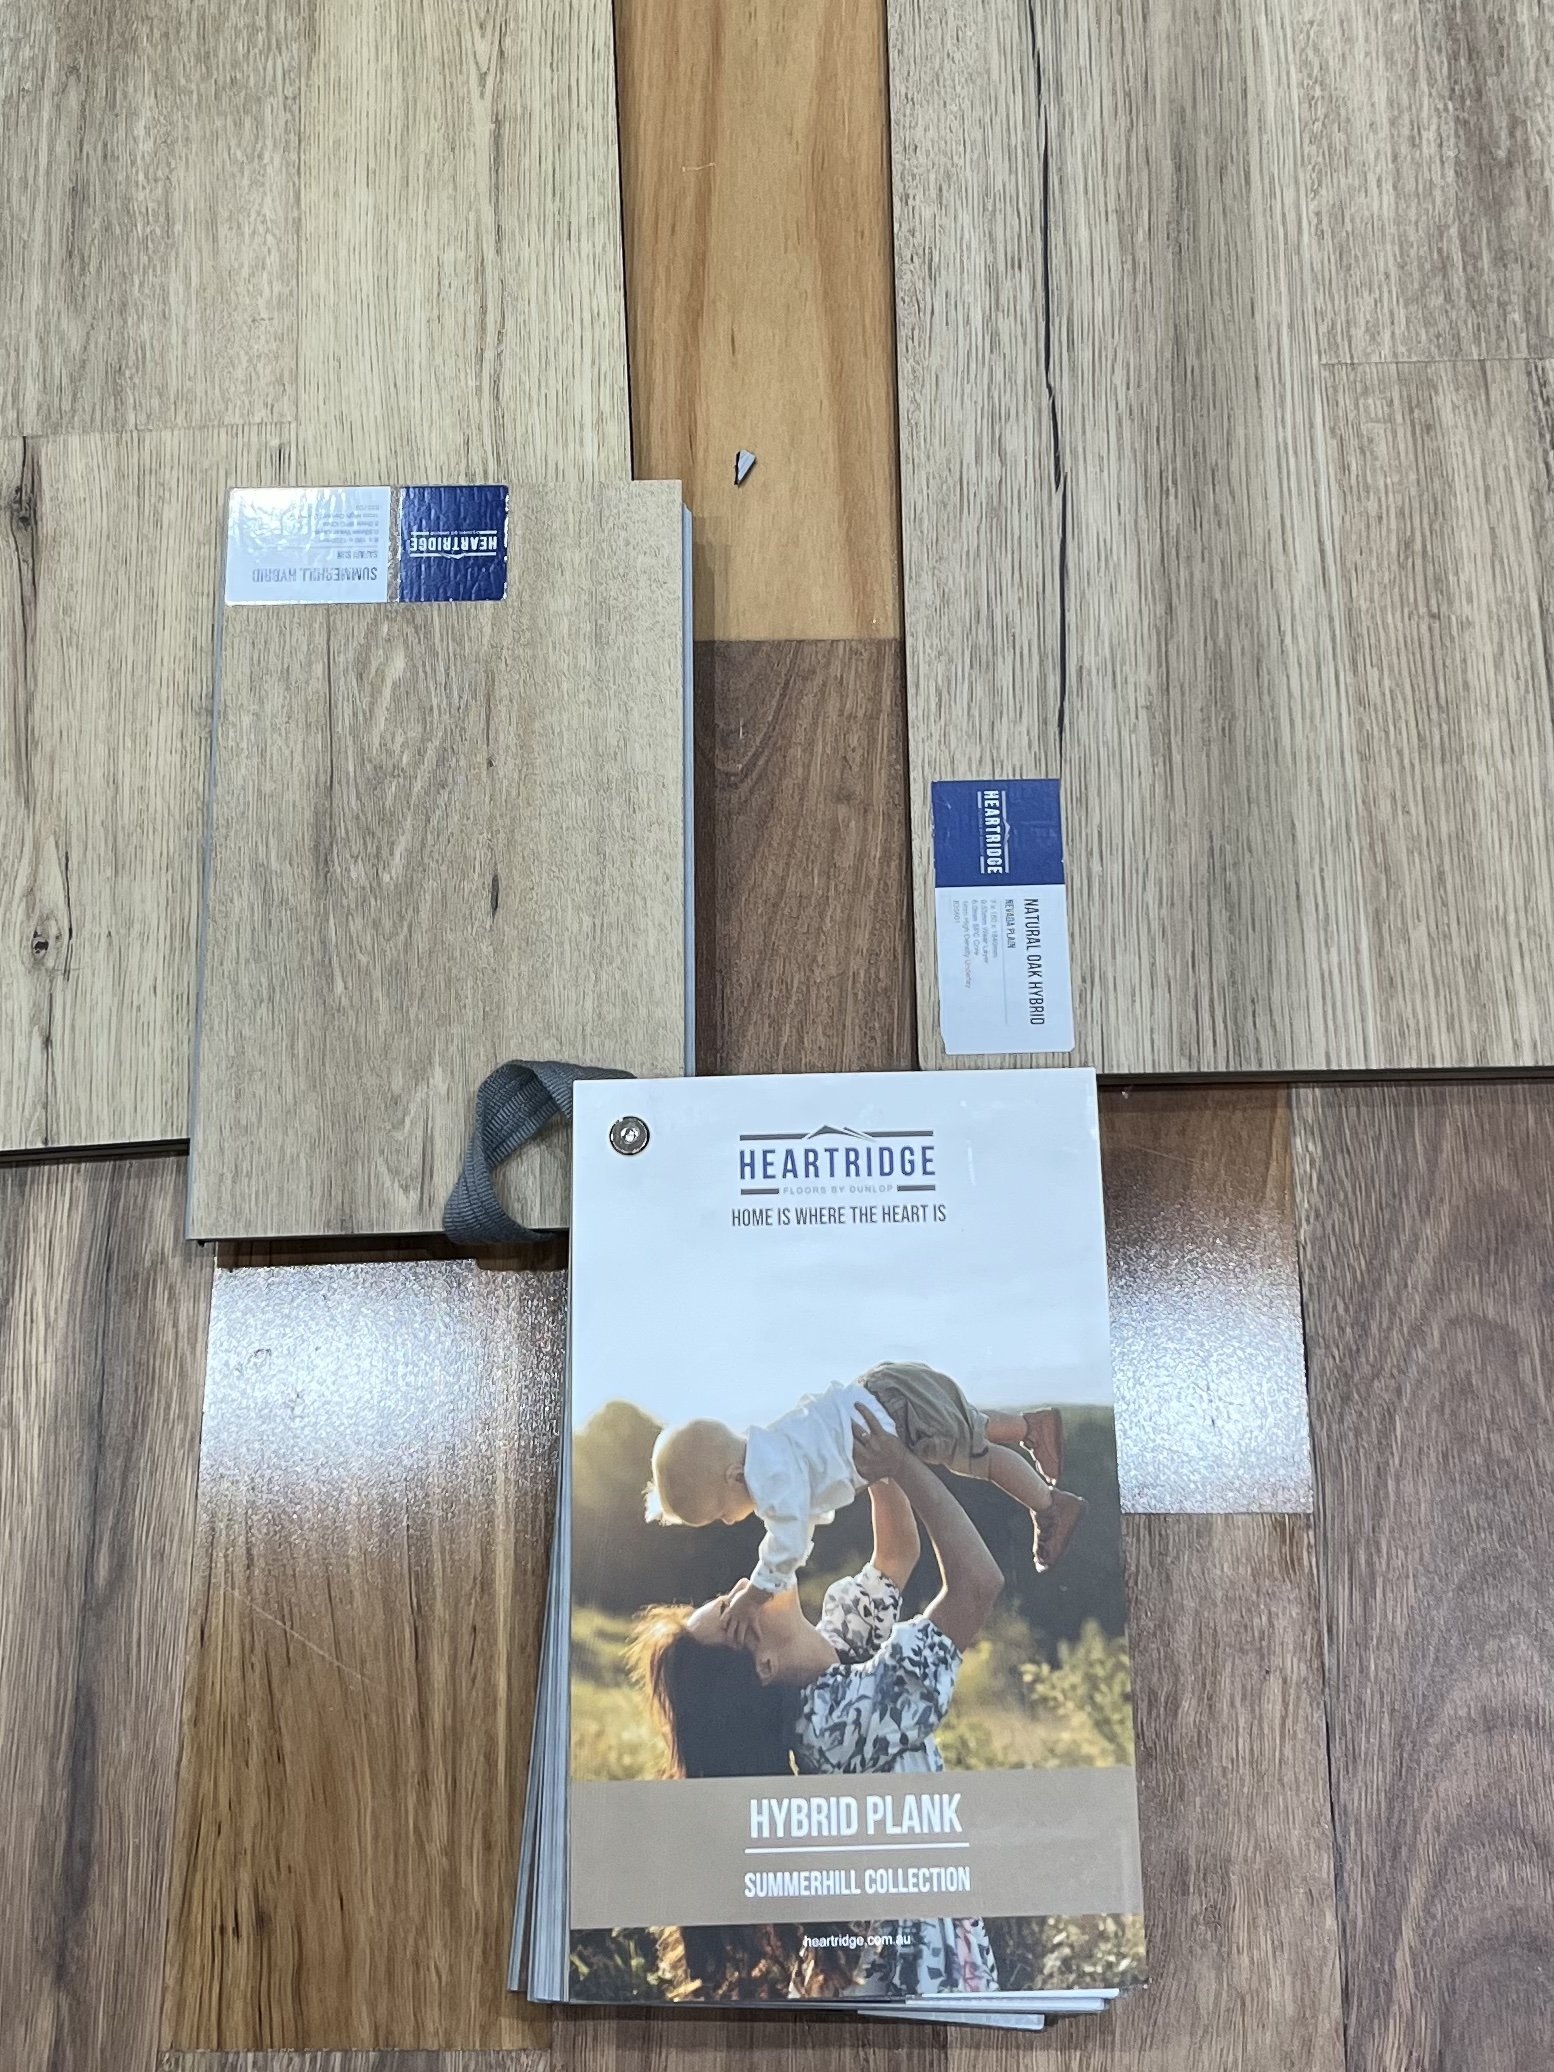   hybrid timber flooring.  Visit us at Camberwell Floorworld to explore our wide selection and get expert advice from our knowledgeable team. Our selection of Hybrid Timber Floors include;    Heartridge Floors    by Dunlop,    Australian Select Timbe